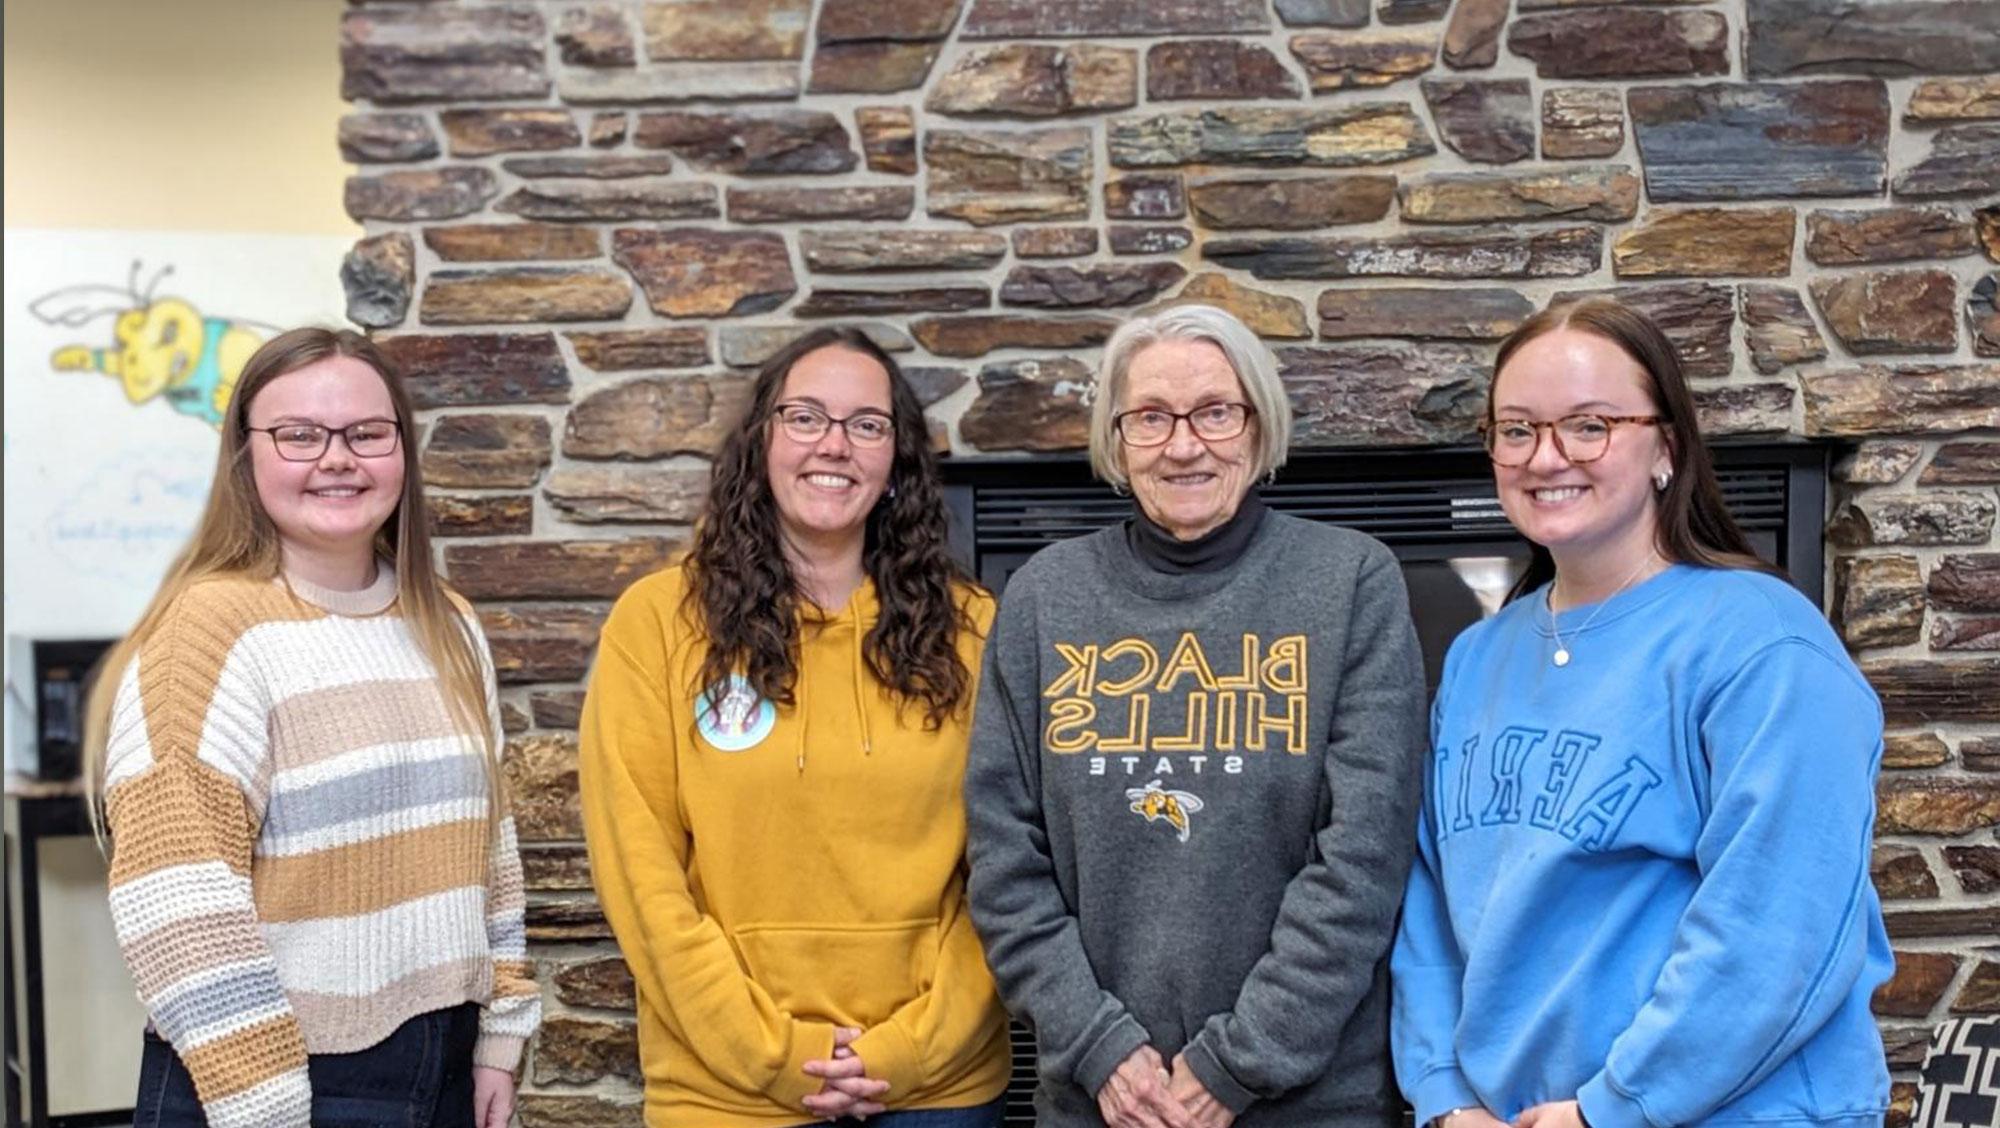 Black Hills State University students meet with the donor of their scholarships, Carol Lundberg. Lundberg recently increased her scholarship, adding three new recipients this spring. Standing (left to right) are Hadley Marquardt, Carol Lundberg, Marissa Tuttle, and Katie Pedneau.